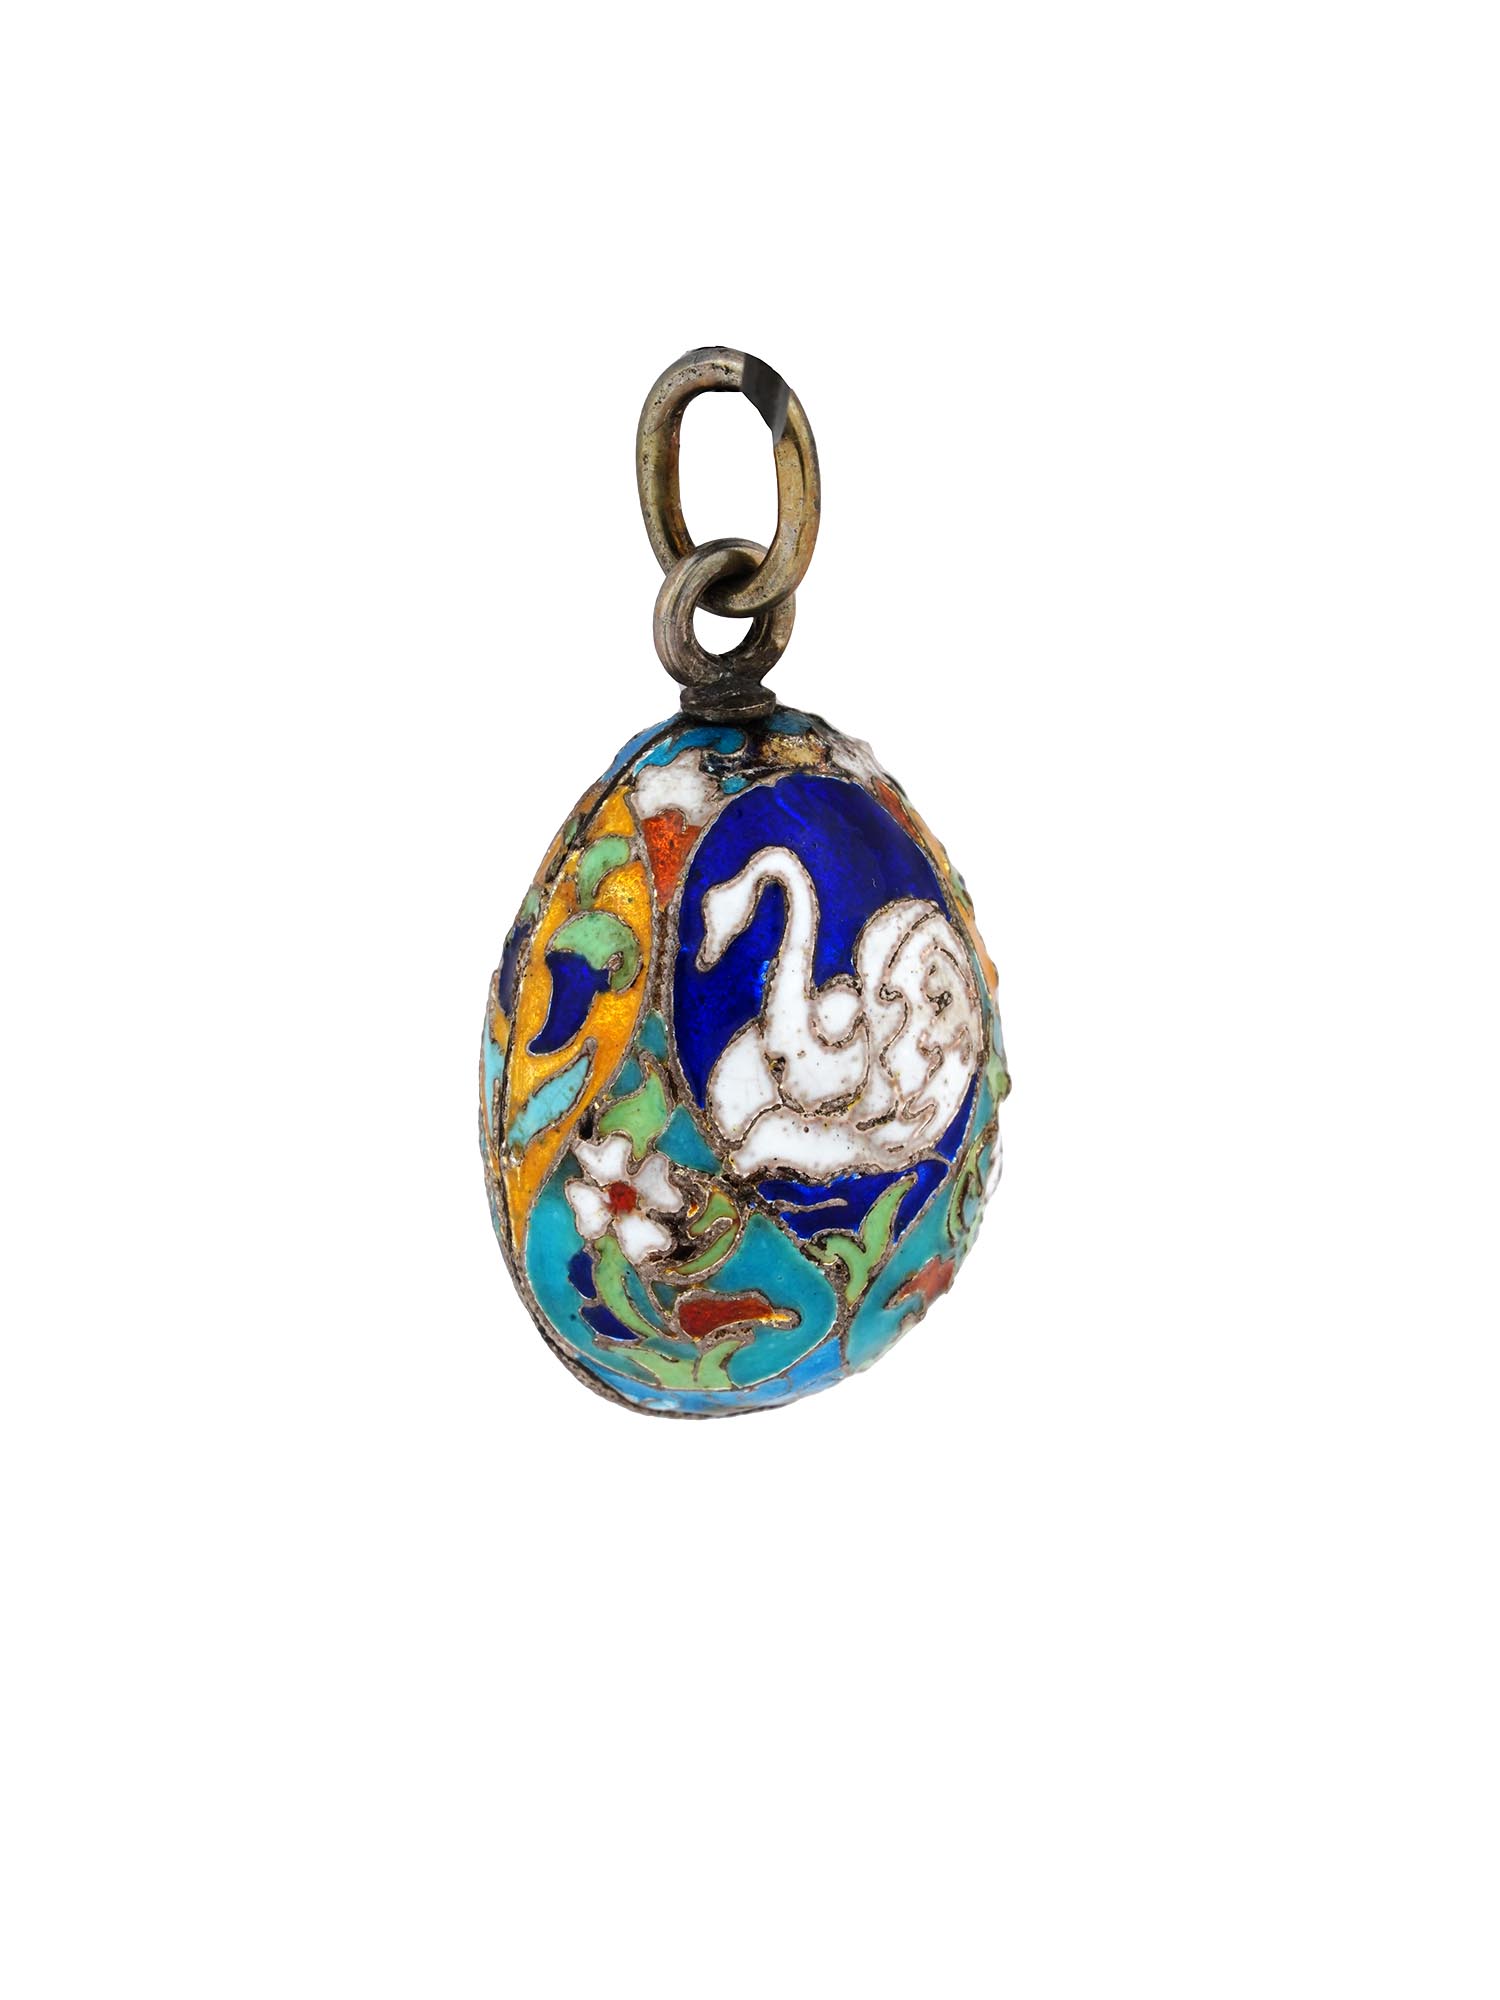 RUSSIAN GILT SILVER ENAMEL EGG PENDANT WITH SWAN PIC-1